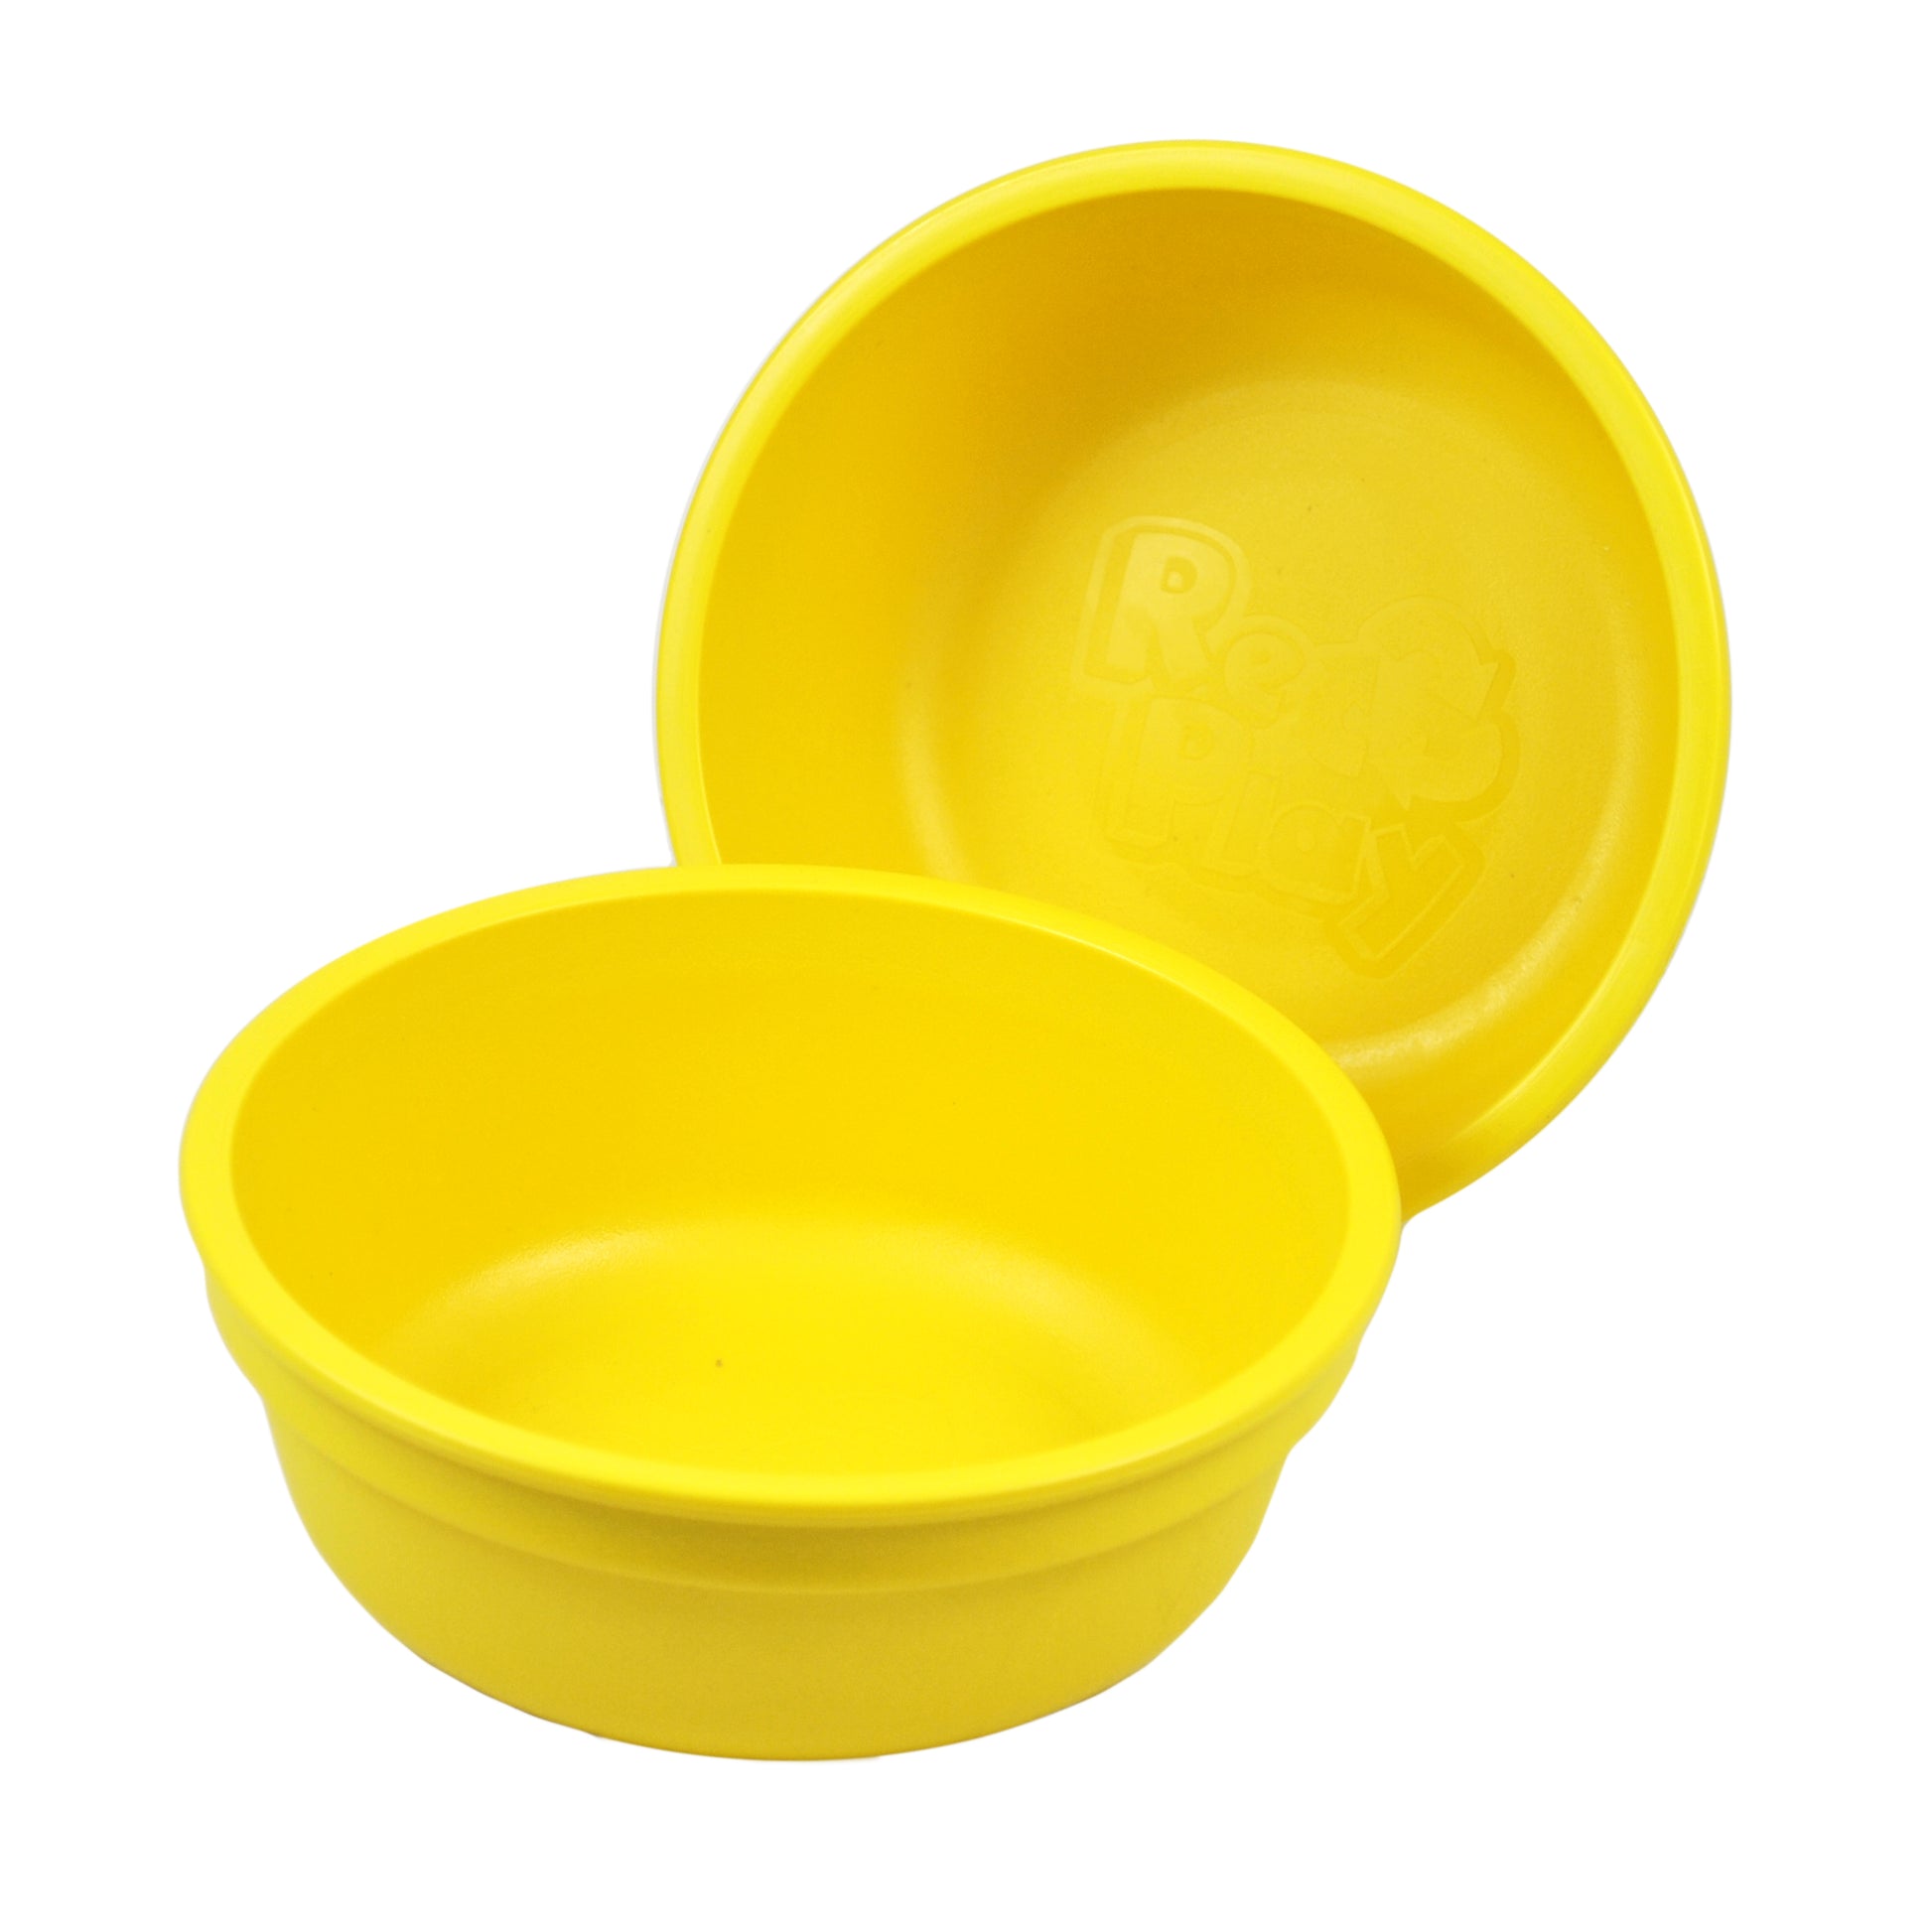 Re-Play Bowl | Standard Size in Yellow from Bear & Moo